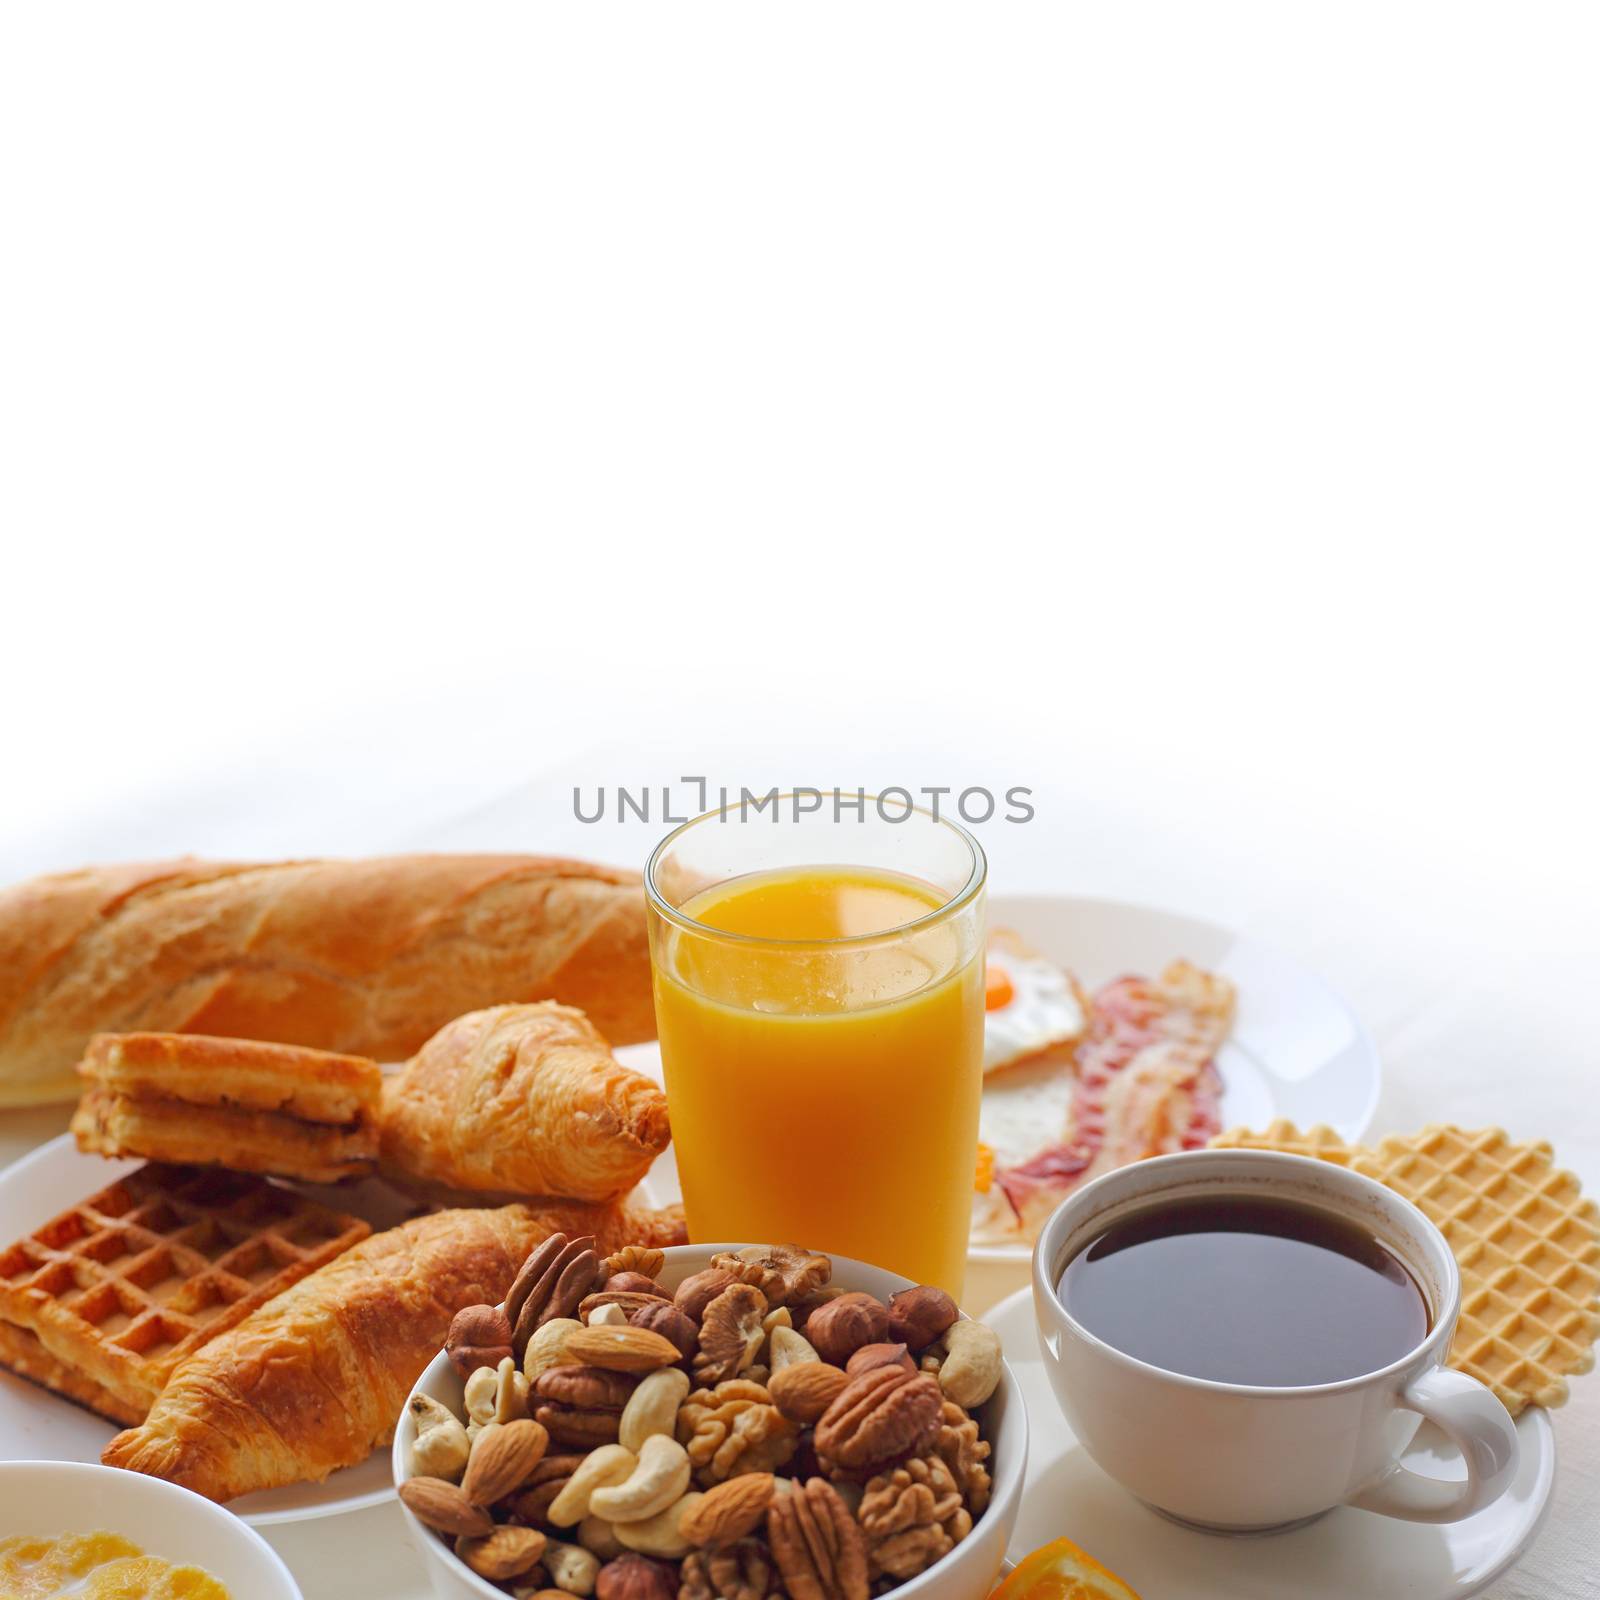 Healthy breakfast with juice ,nuts, coffee, eggs, bread, oat grains and other on white background. White copy space for text, frame